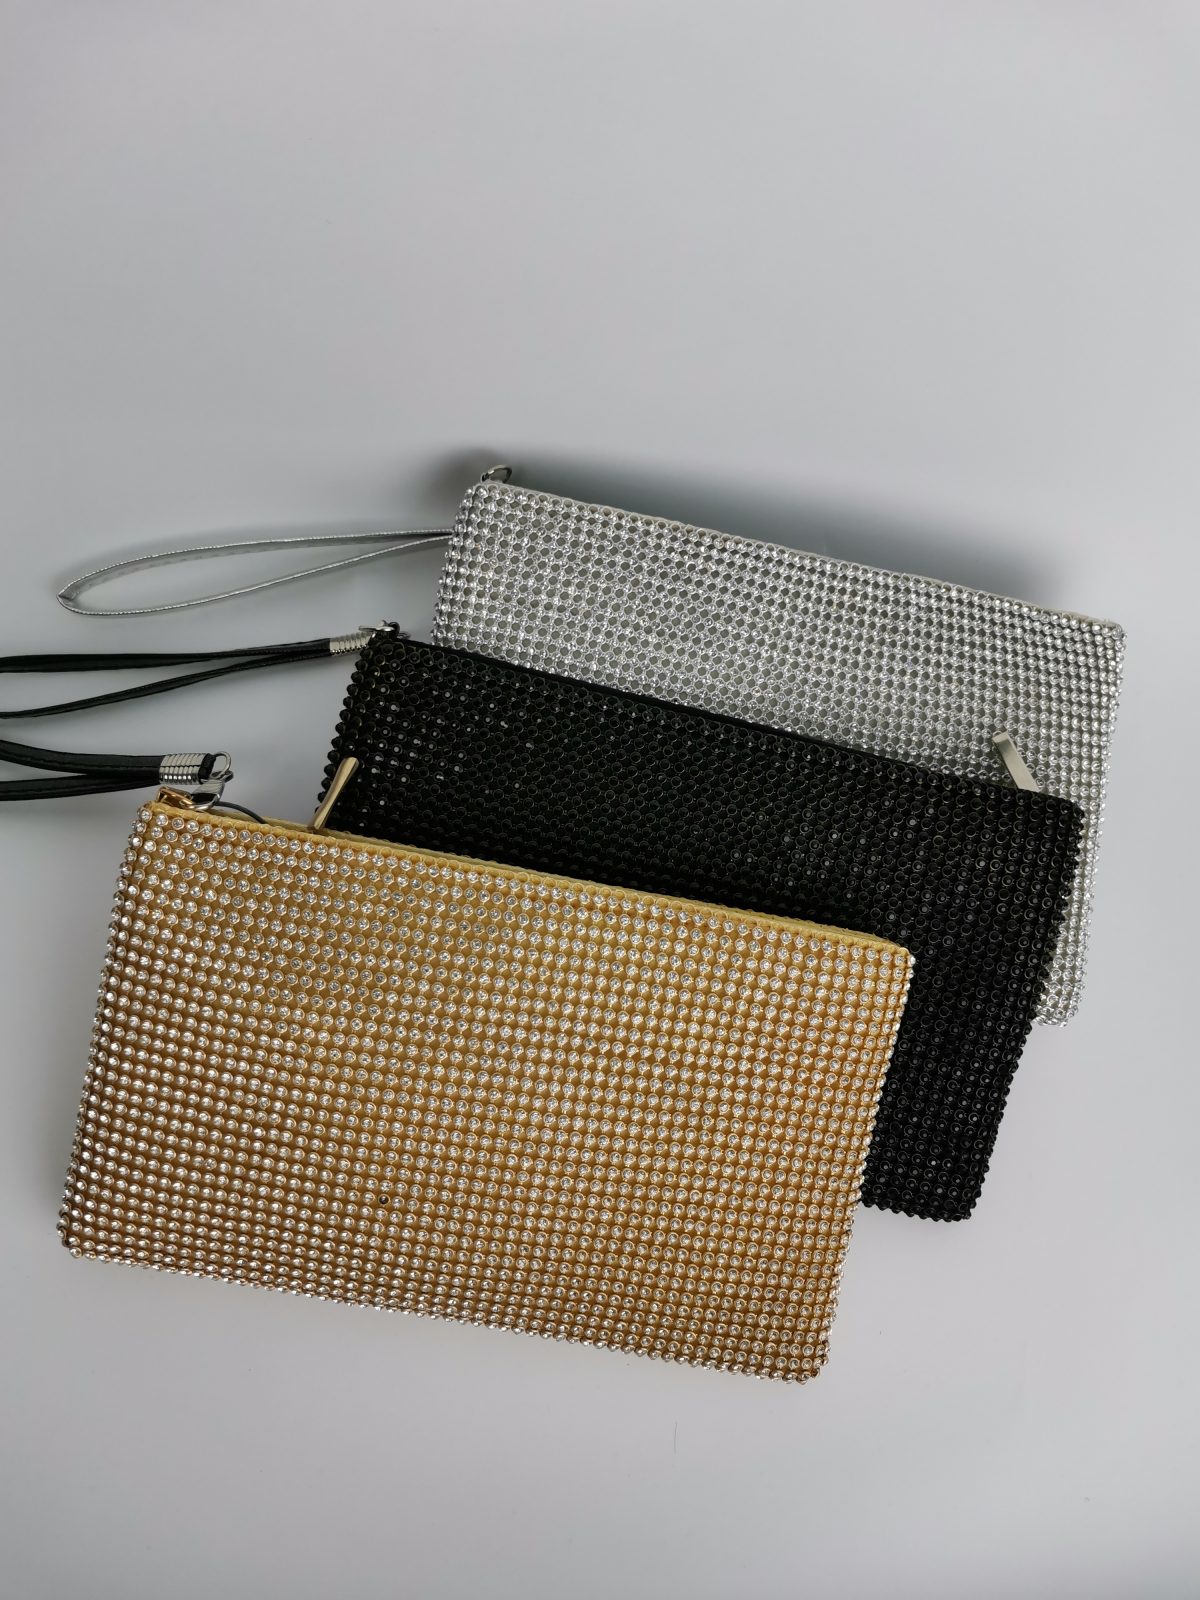 Frost mini bag in different colors